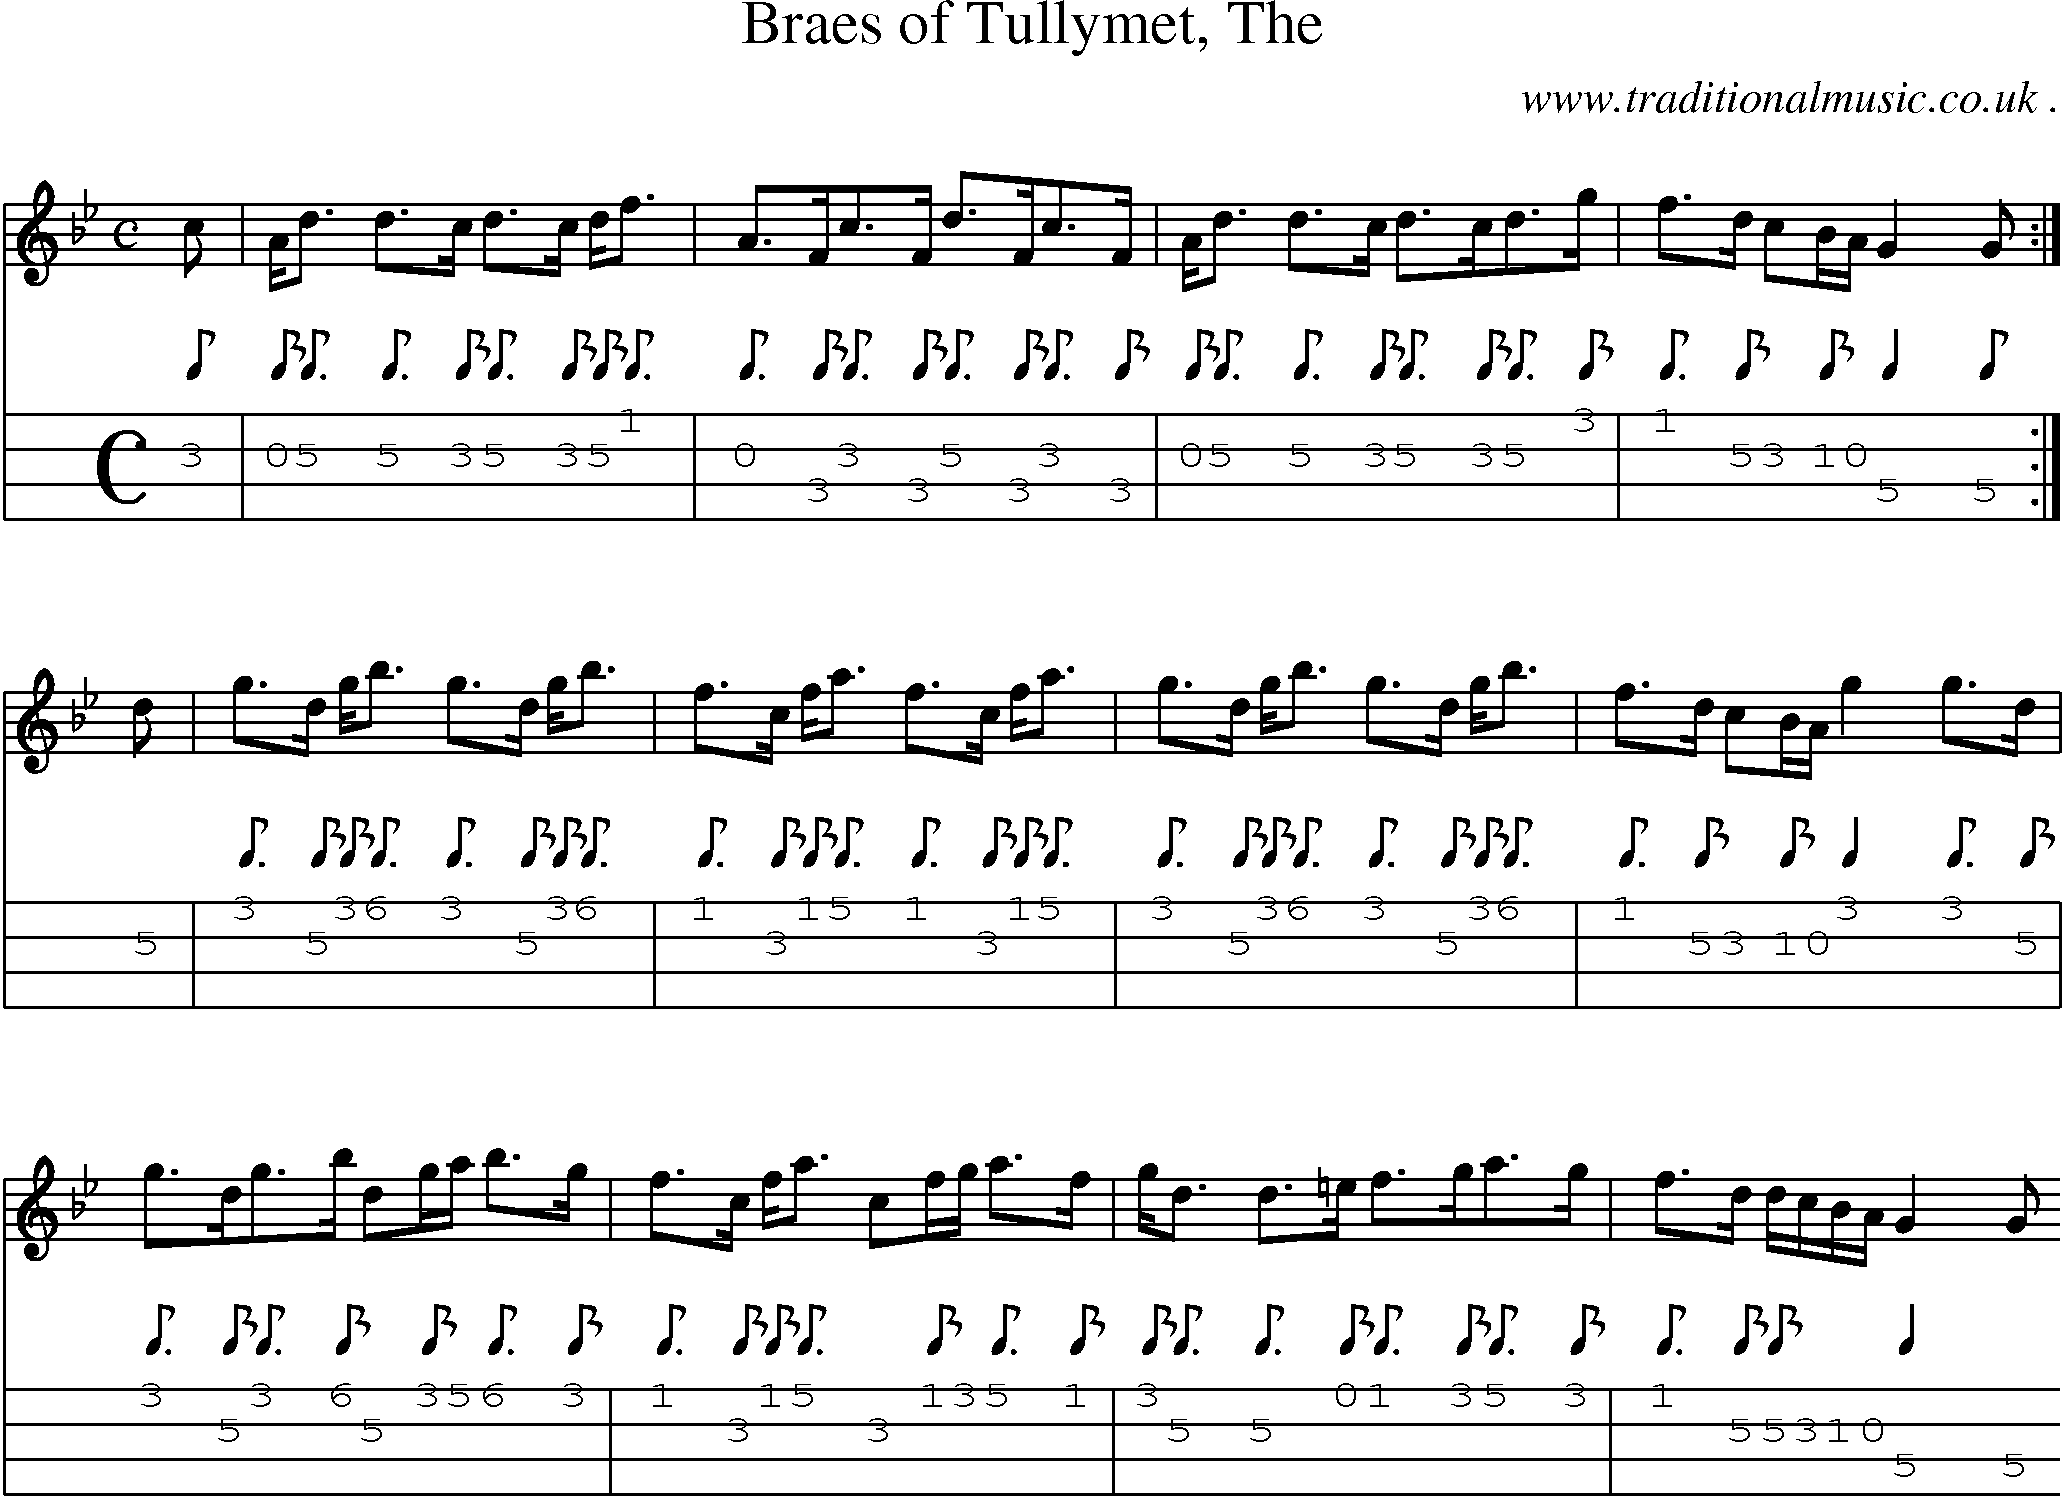 Sheet-music  score, Chords and Mandolin Tabs for Braes Of Tullymet The